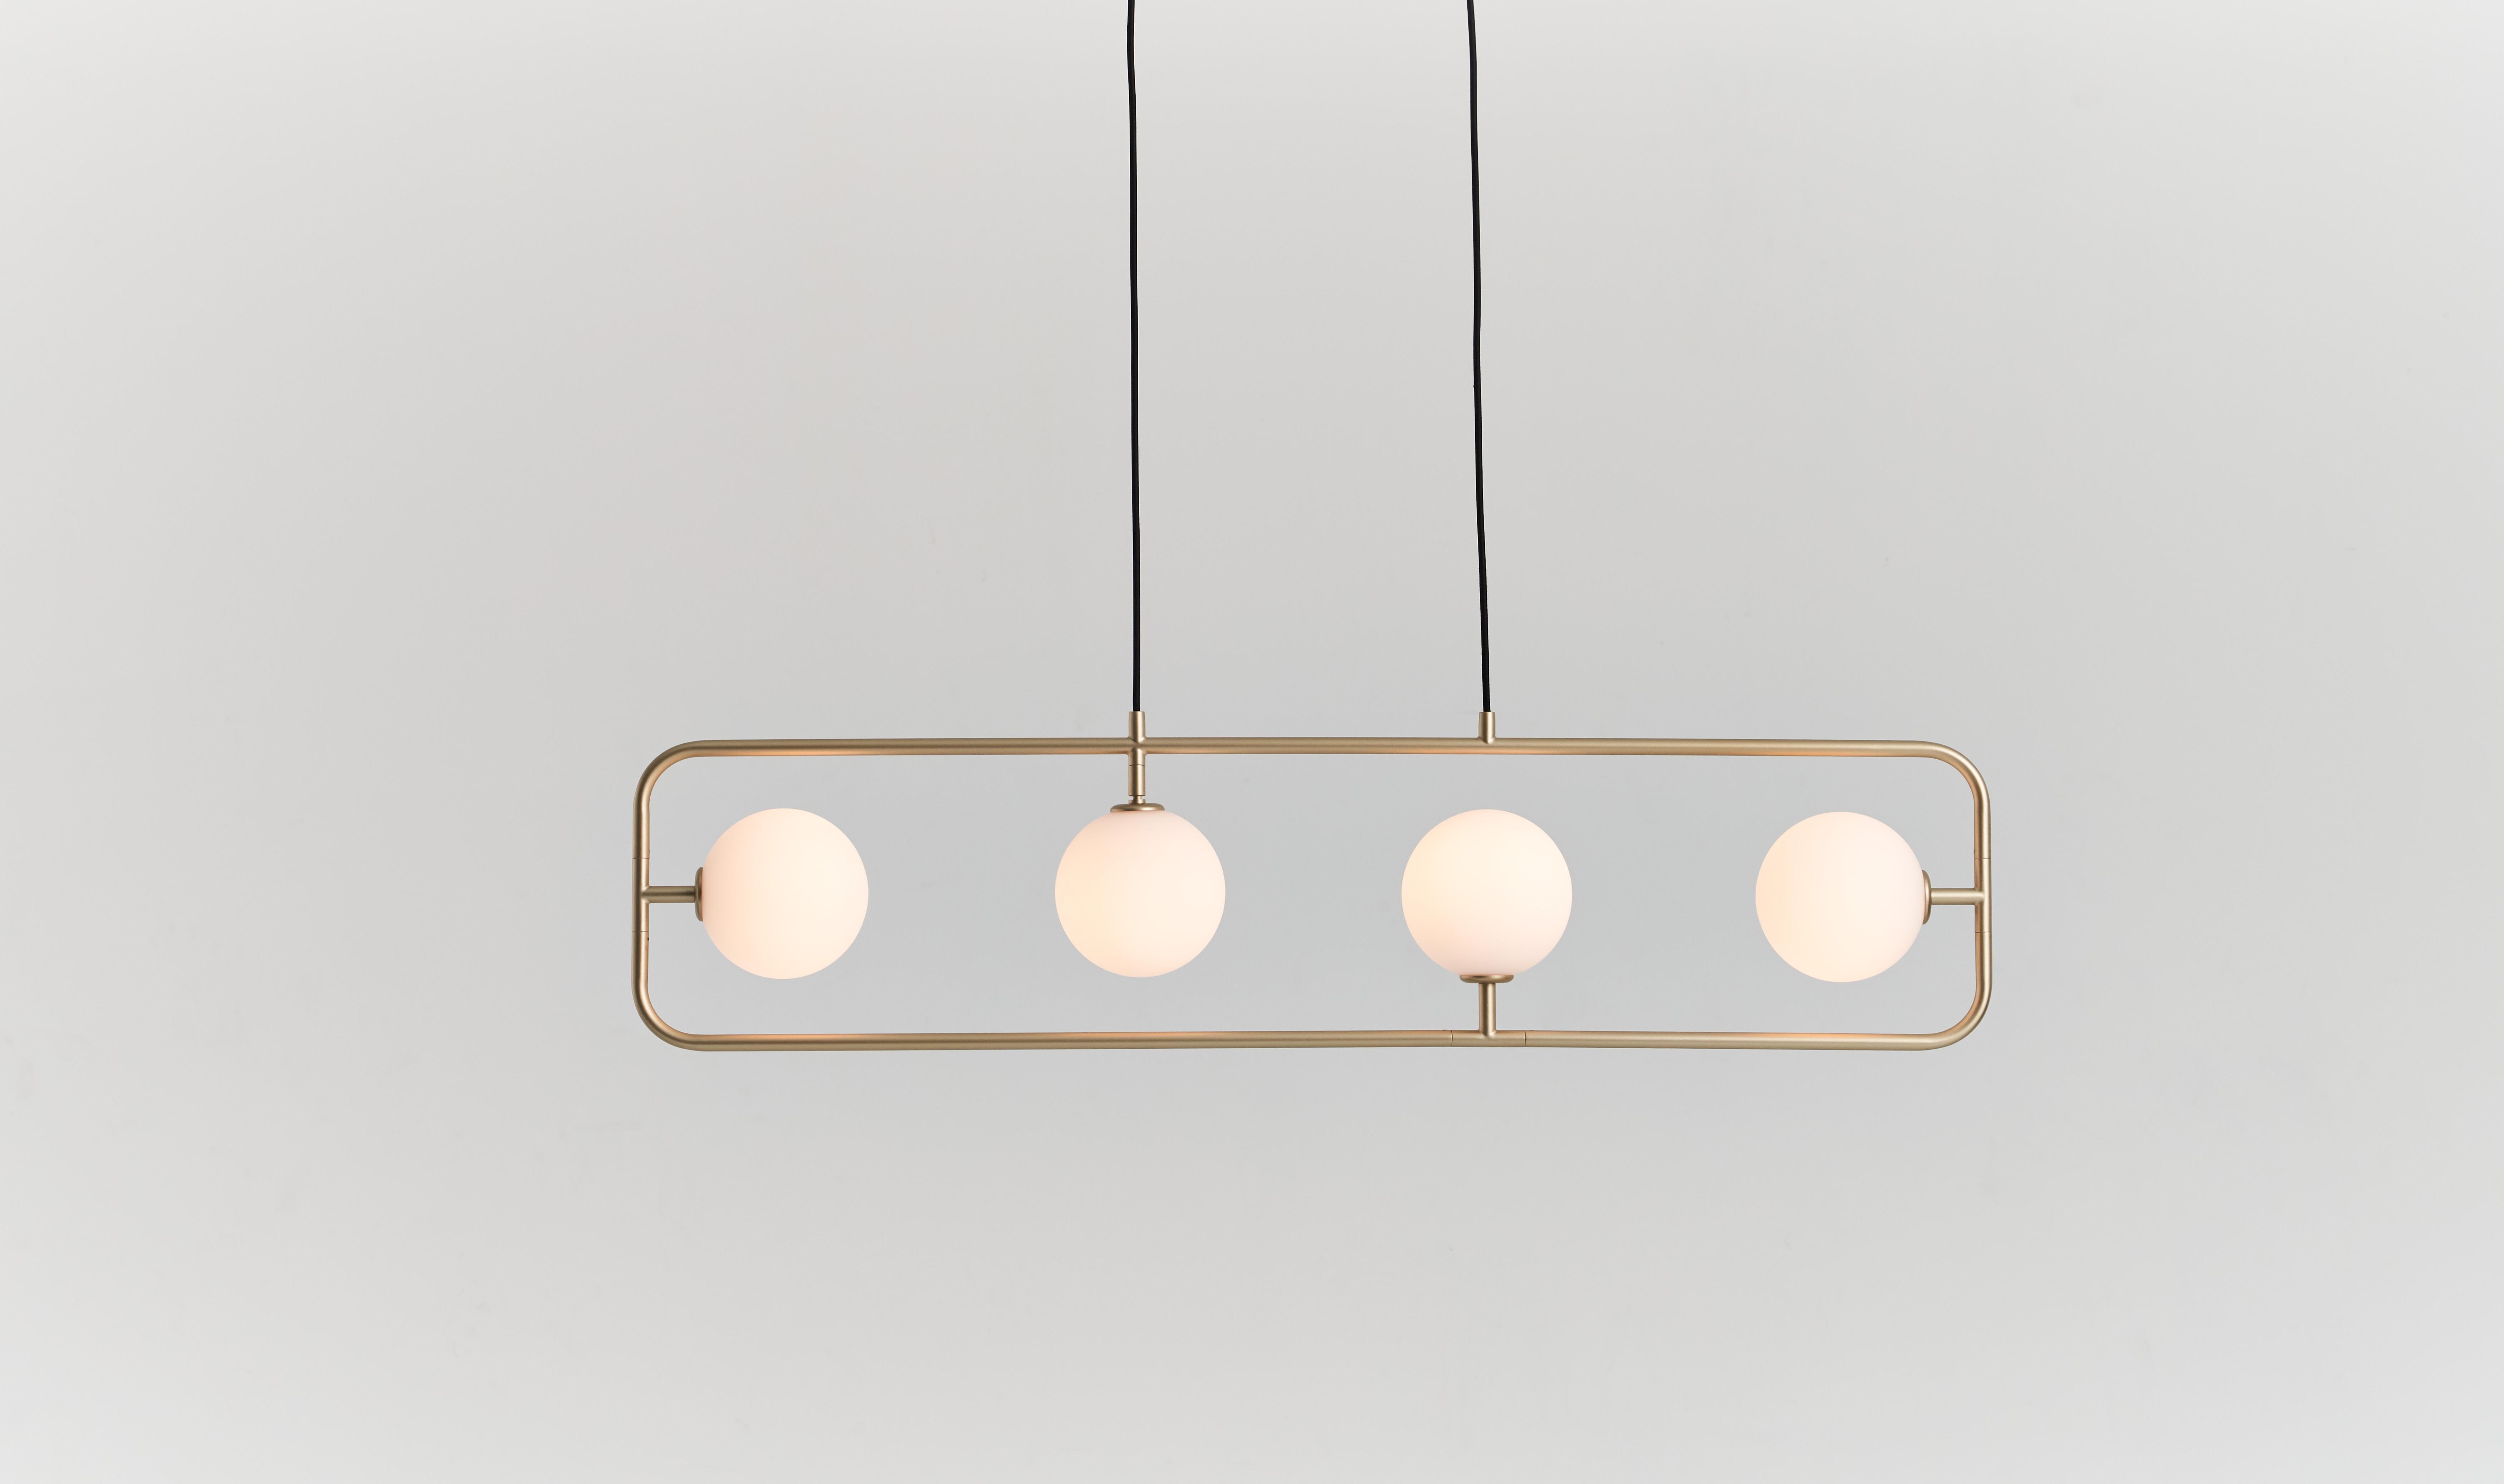 Sircle pendant PH4, a symbolization merged Square and circle, inspired by the East aesthetic philosophy, the circular light ball just like a soft tender mind leans on the rigid prudent frame, chemically shaped a harmonious feature with its flexible